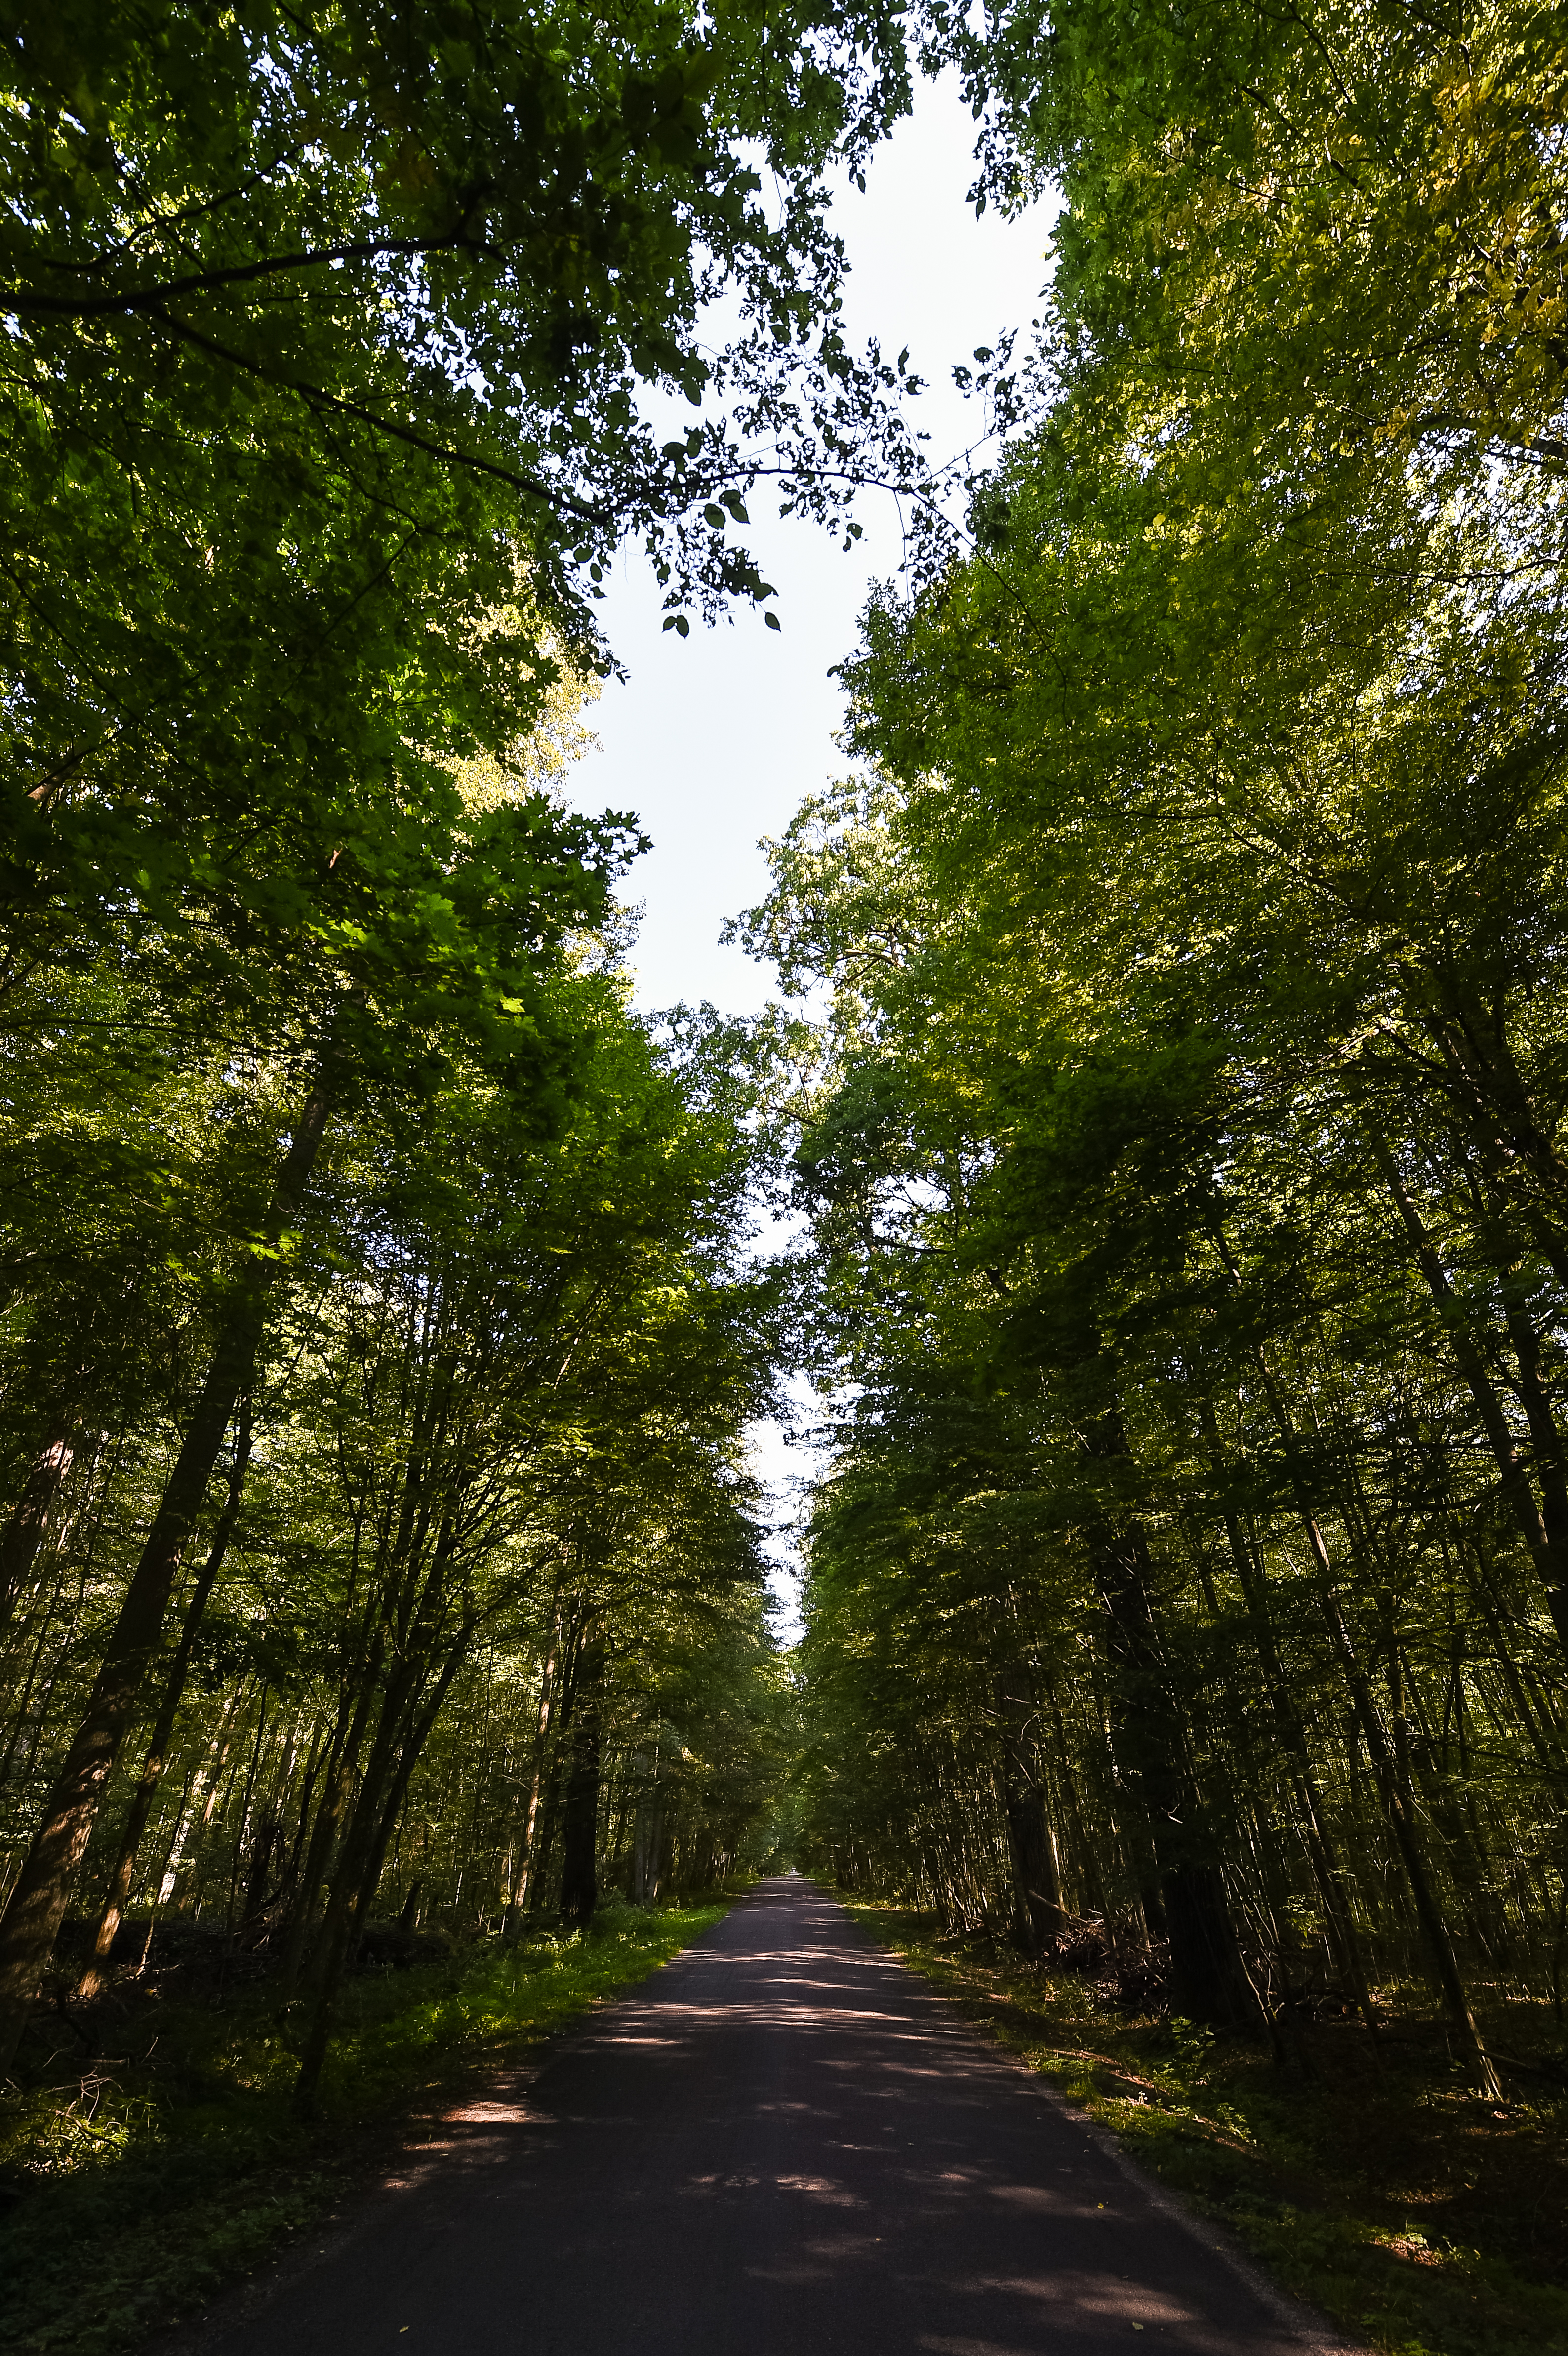 Road through the forest in The Bialowieza National Park